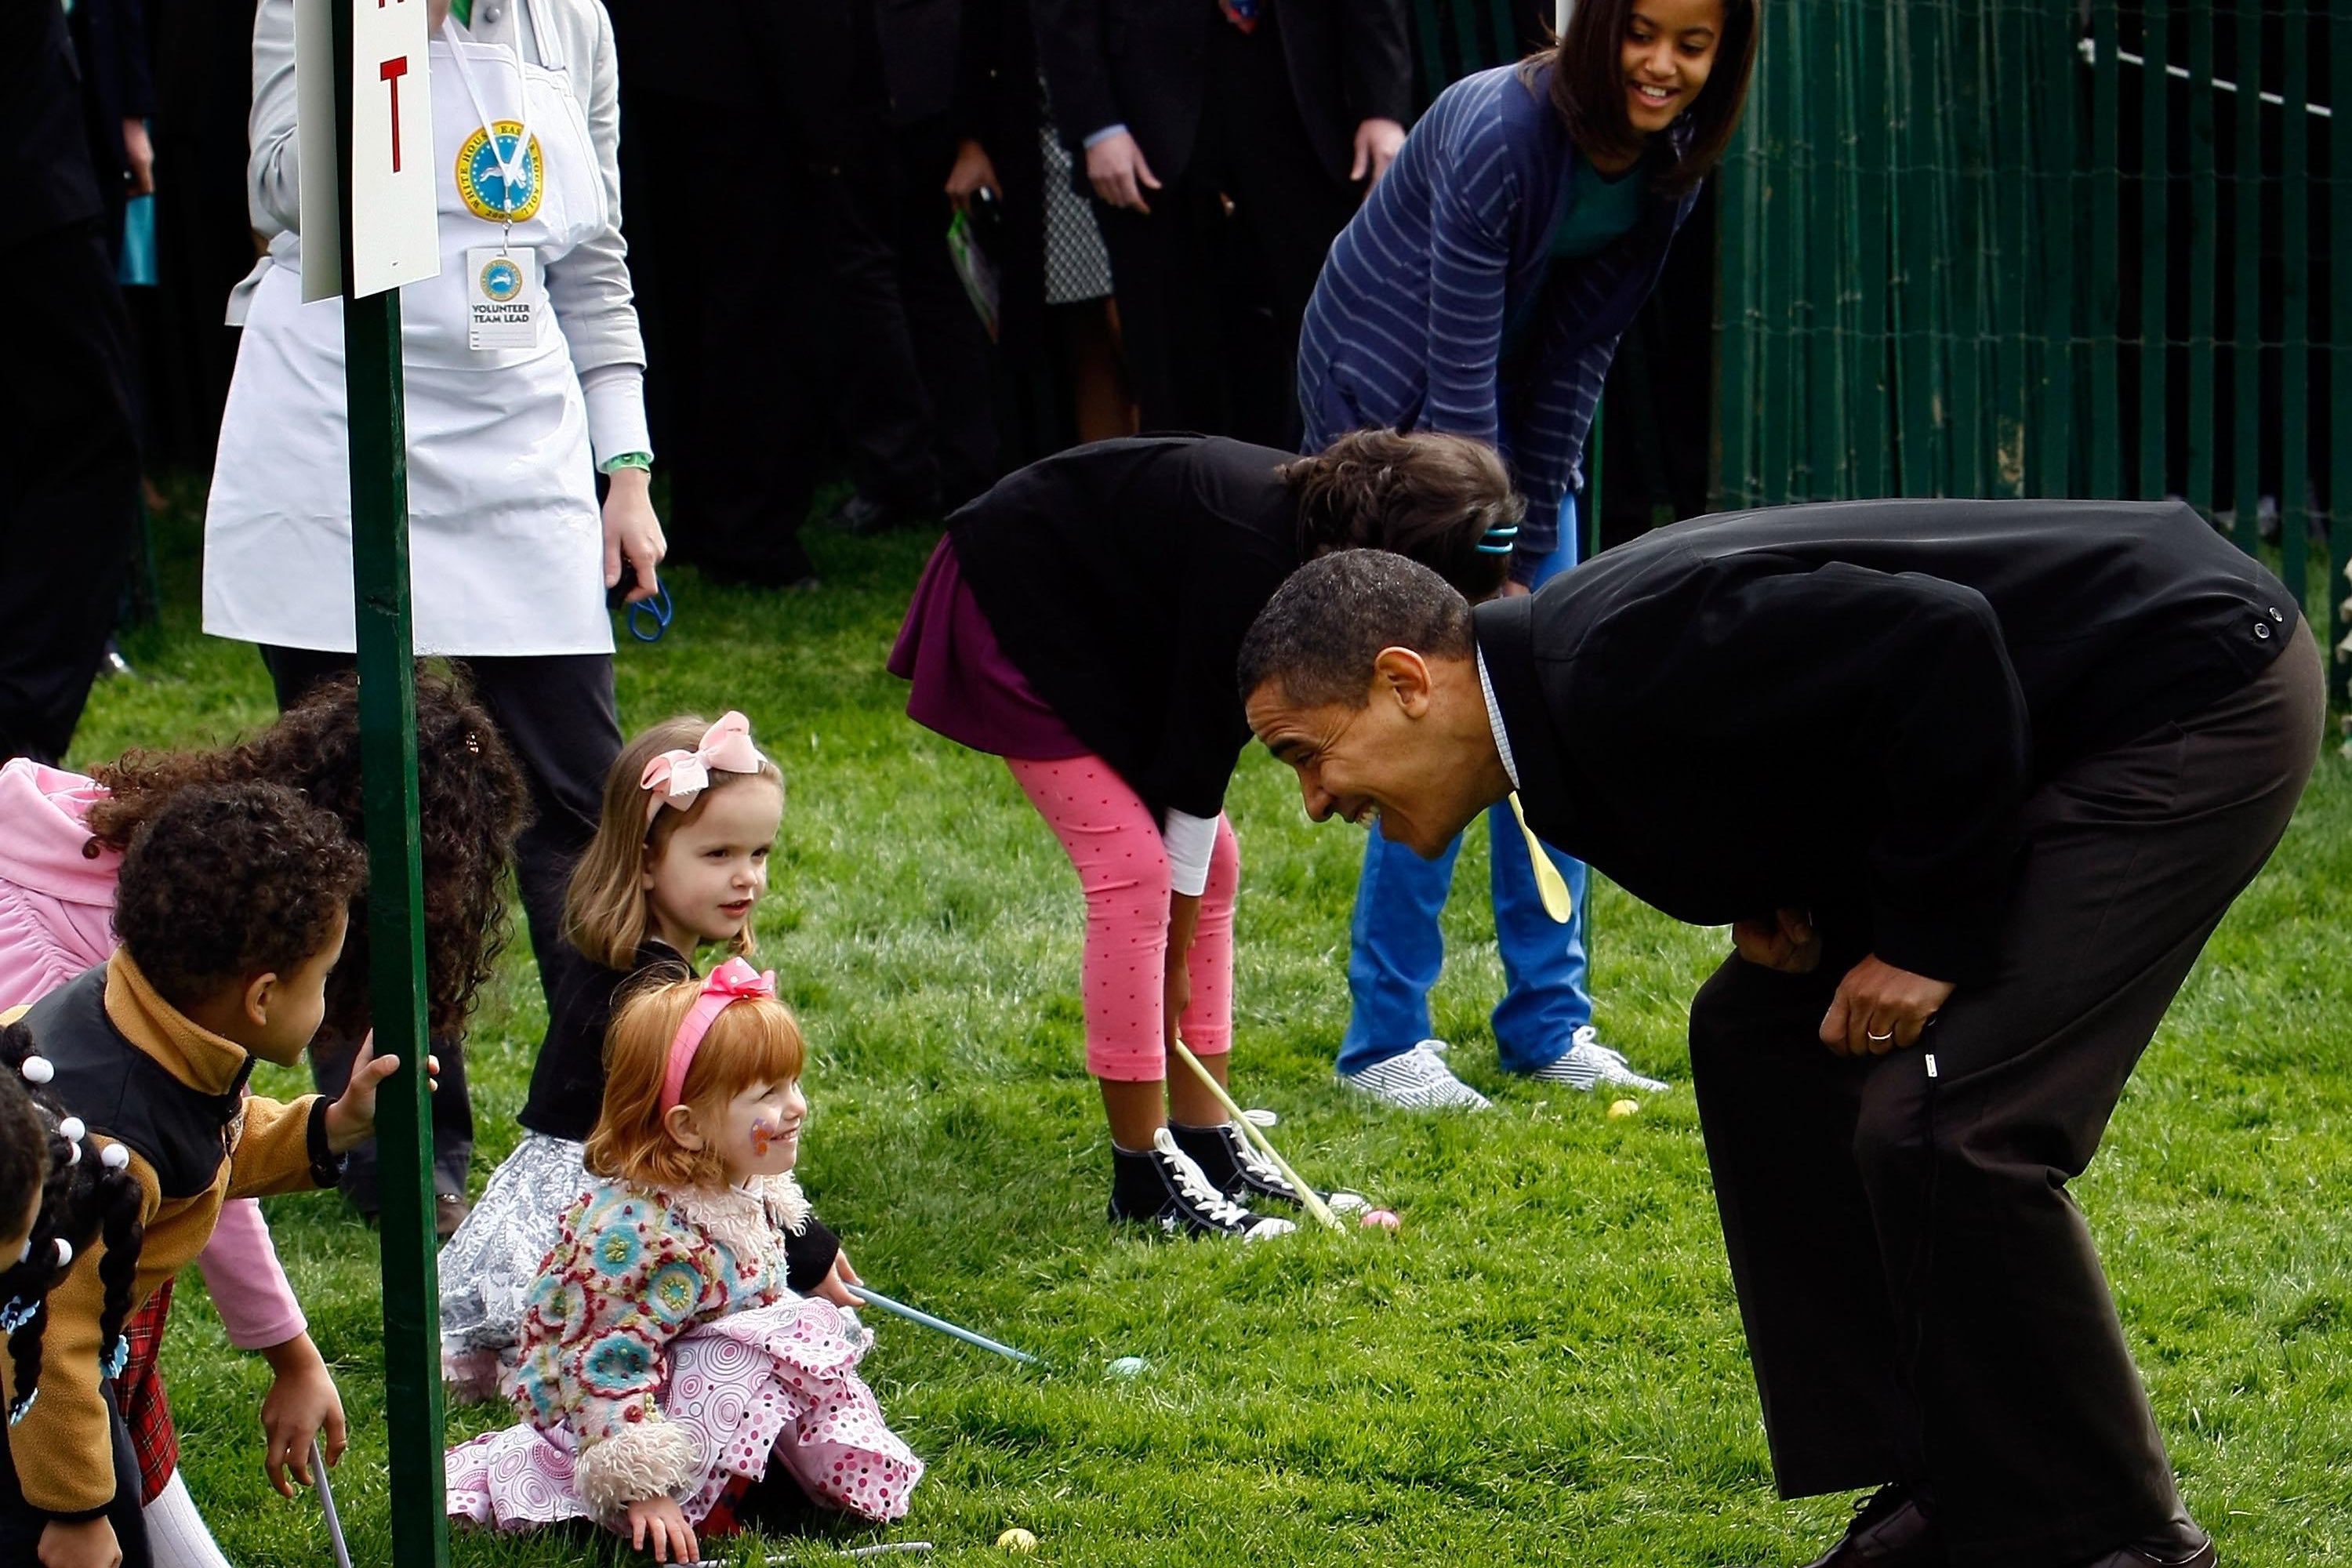 Obama leans down to talk to children competing in an Easter egg roll.